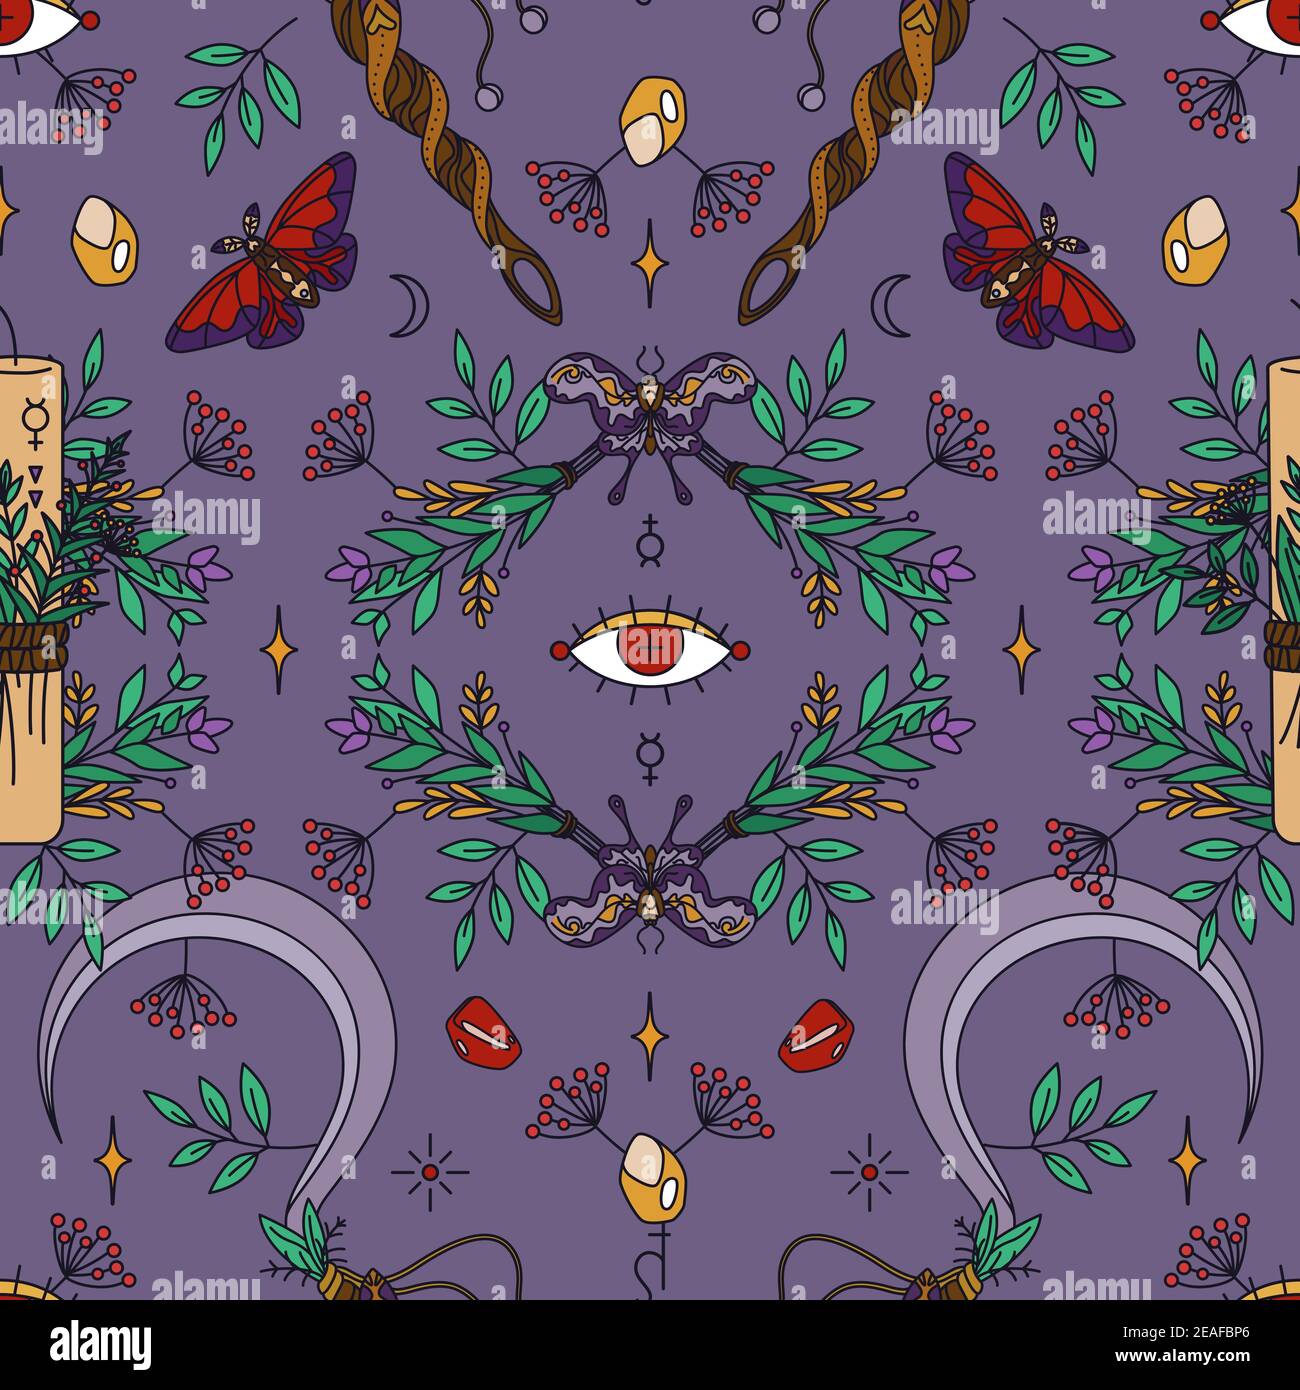 Seamless wicca pattern with candles, sickles, twigs and moths. Herbal healing and shamanism - esoteric print design Stock Vector